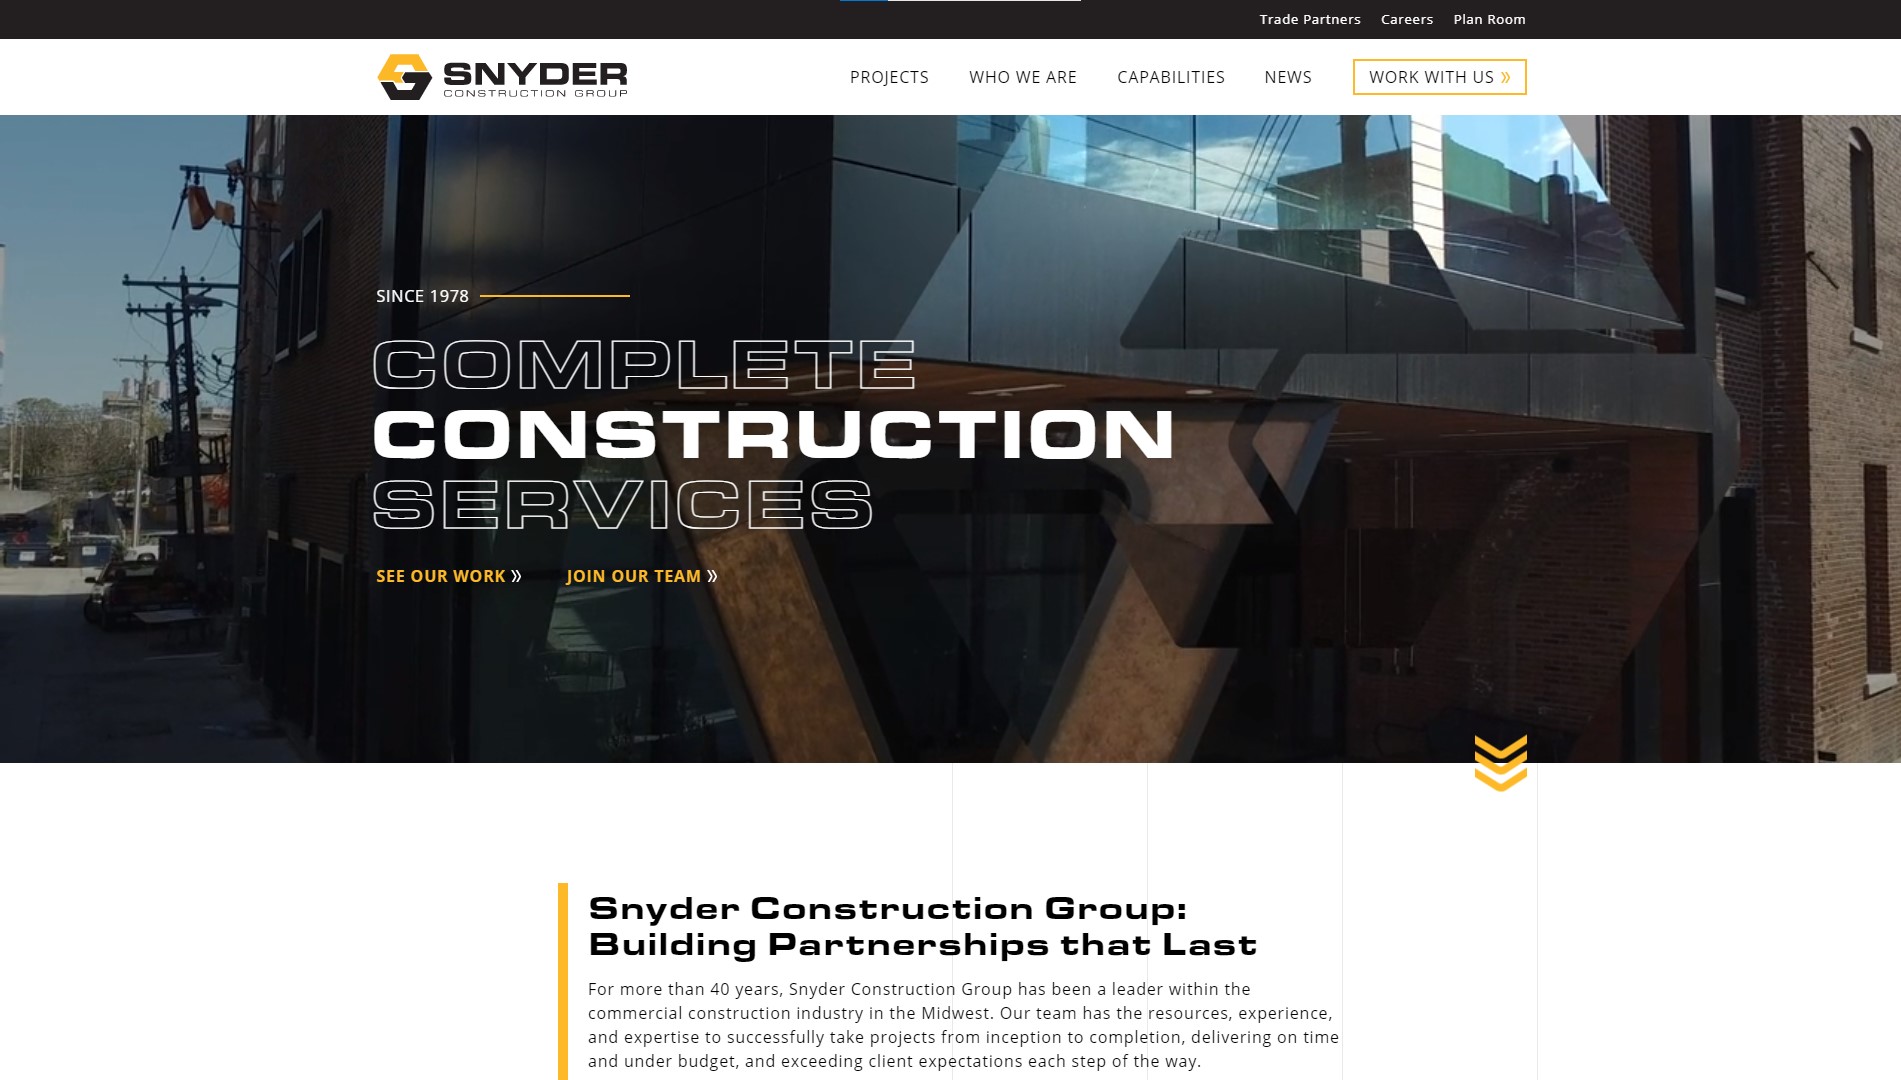 Snyder Construction Group Business & Corporate Animation